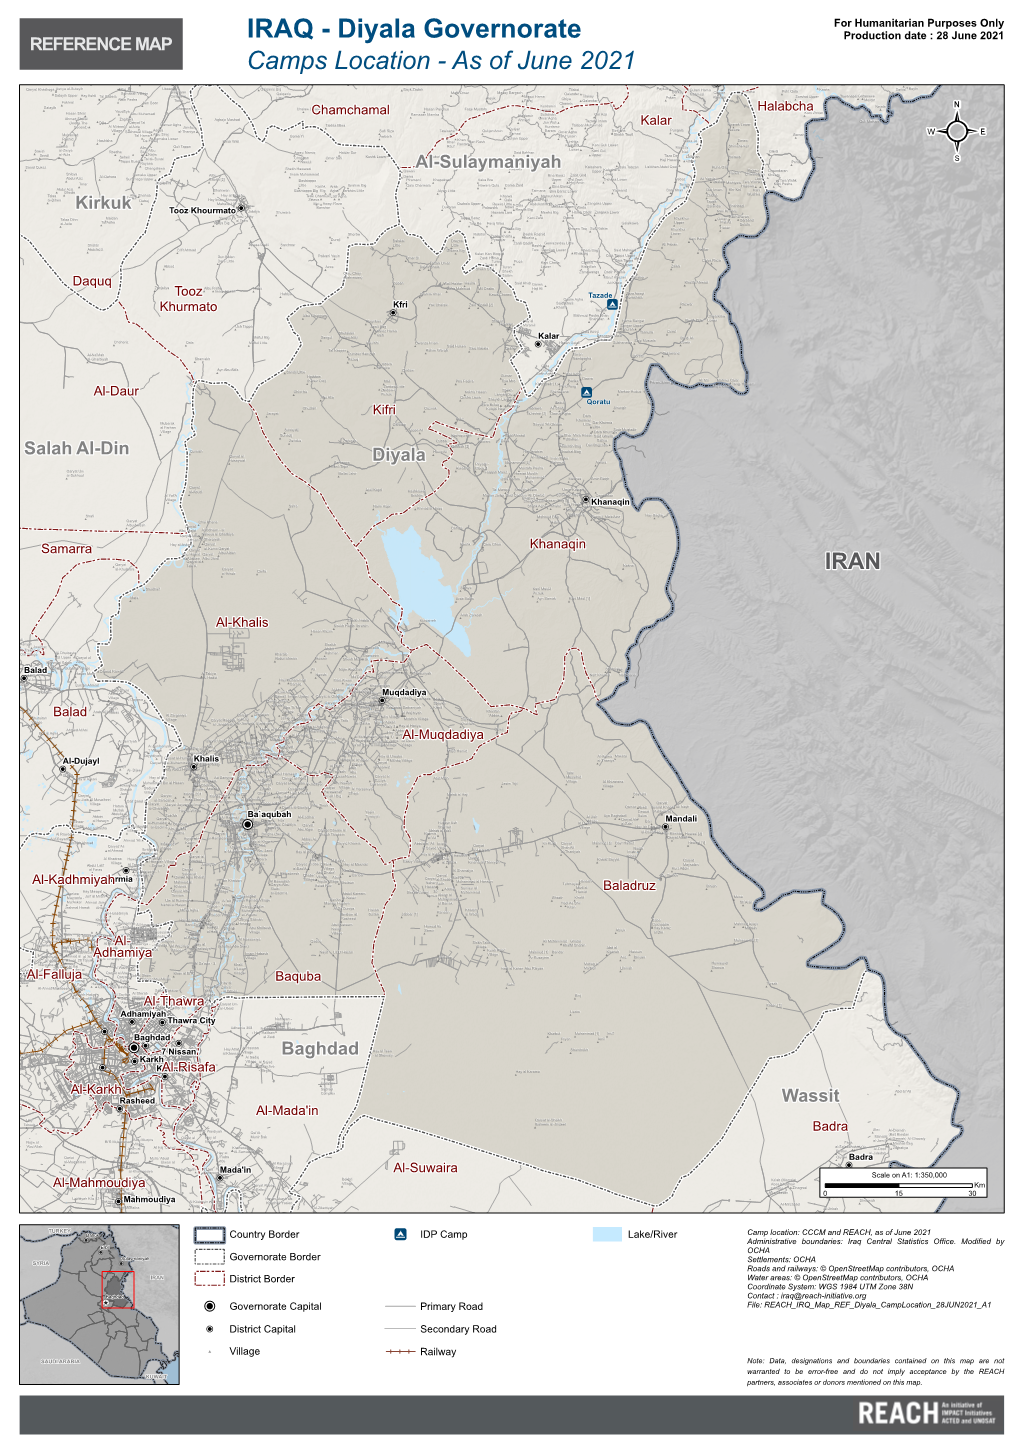 IRAQ - Diyala Governorate Production Date : 28 June 2021 REFERENCE MAP Camps Location - As of June 2021